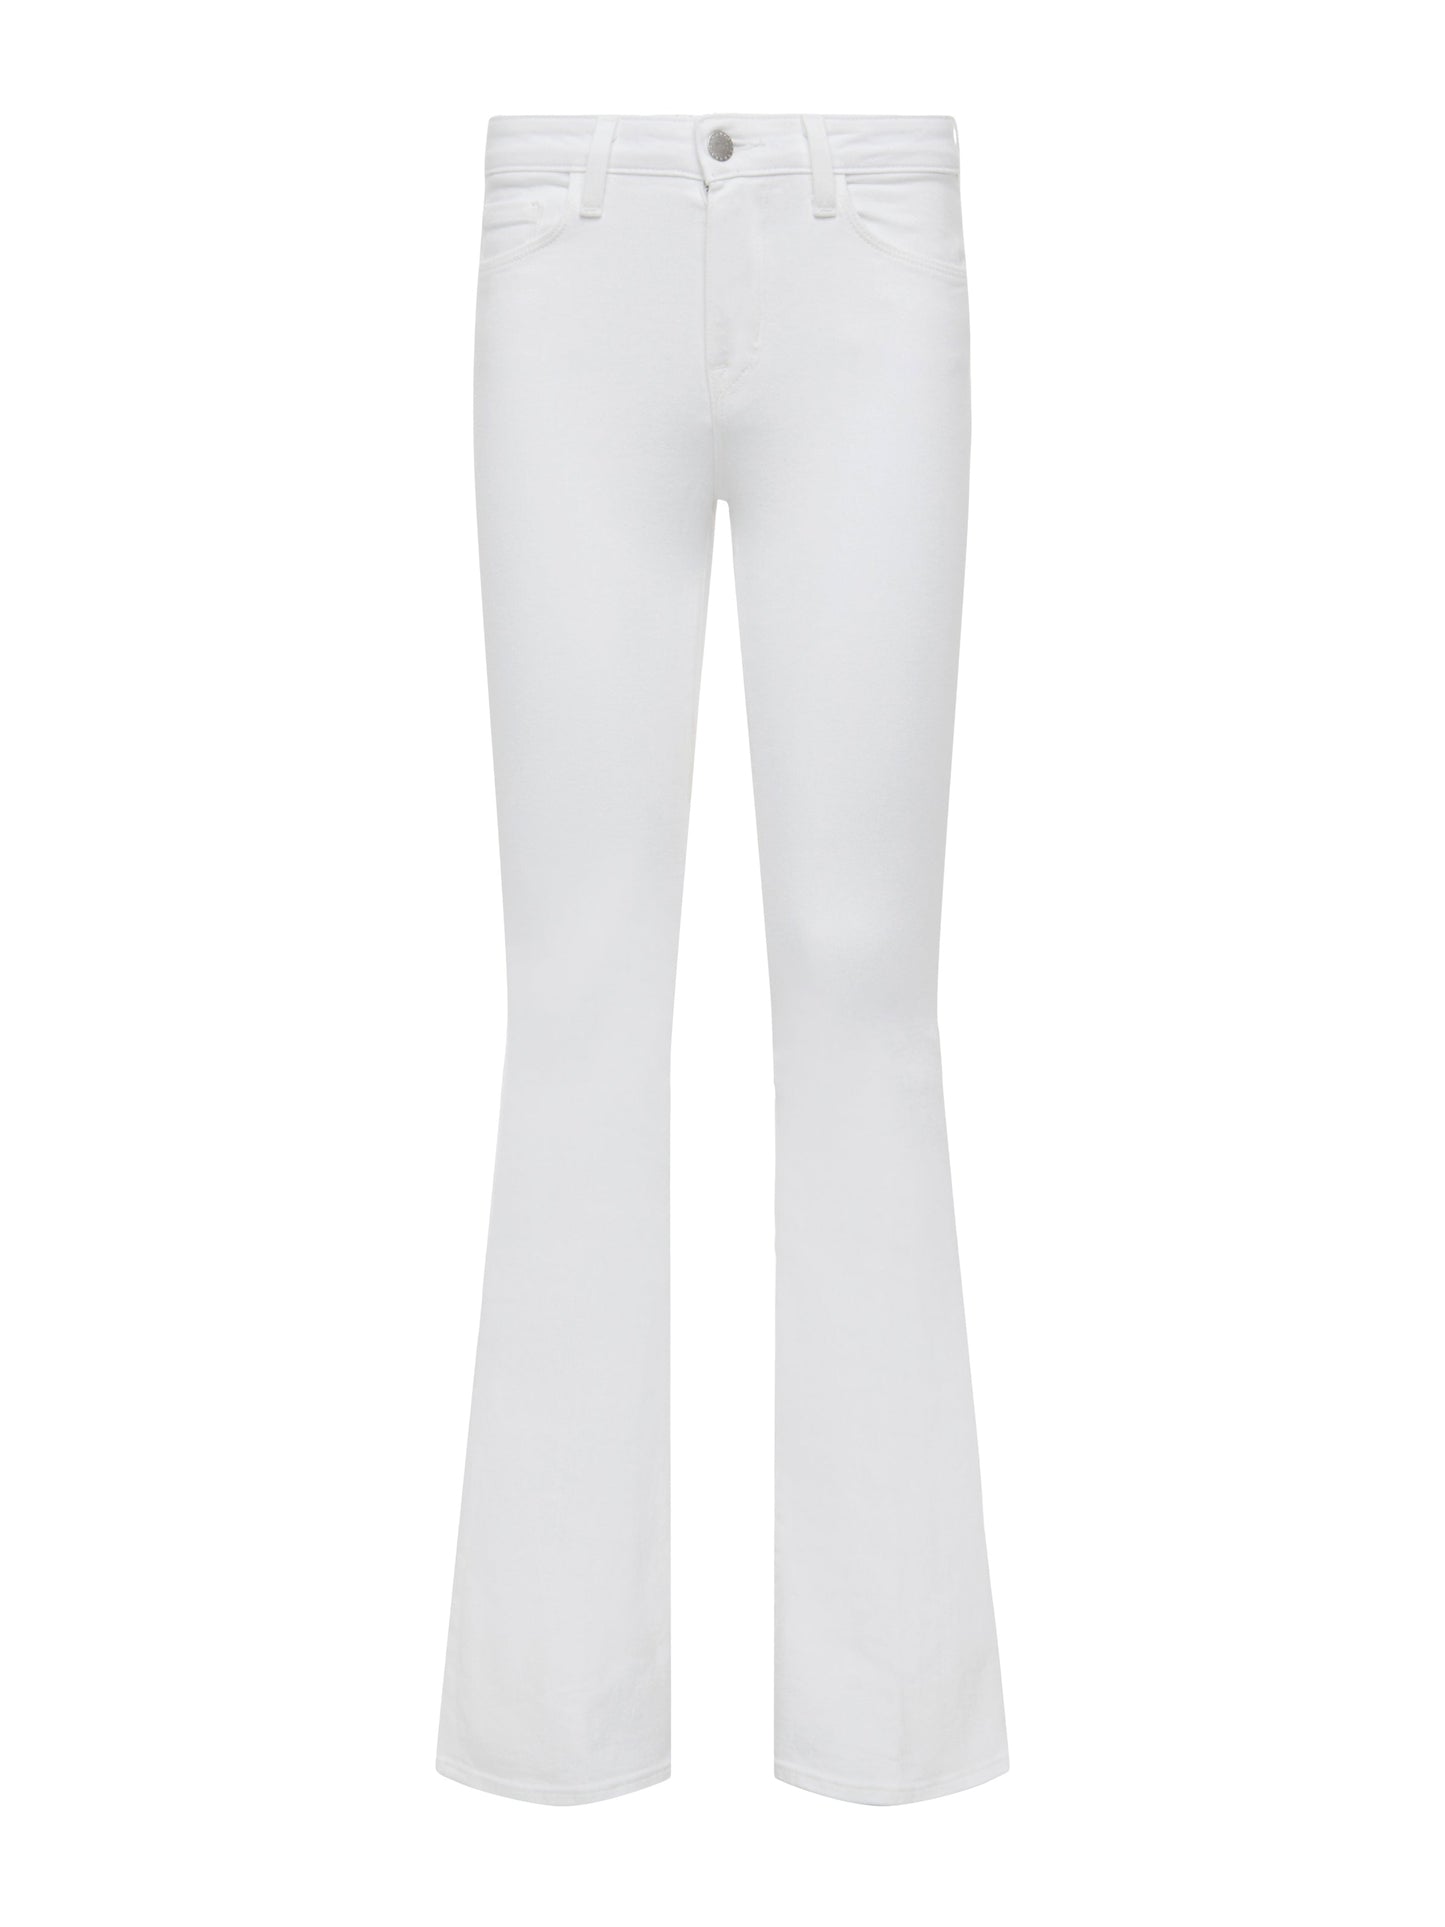 Lagence Bell High Rise Flare Jeans